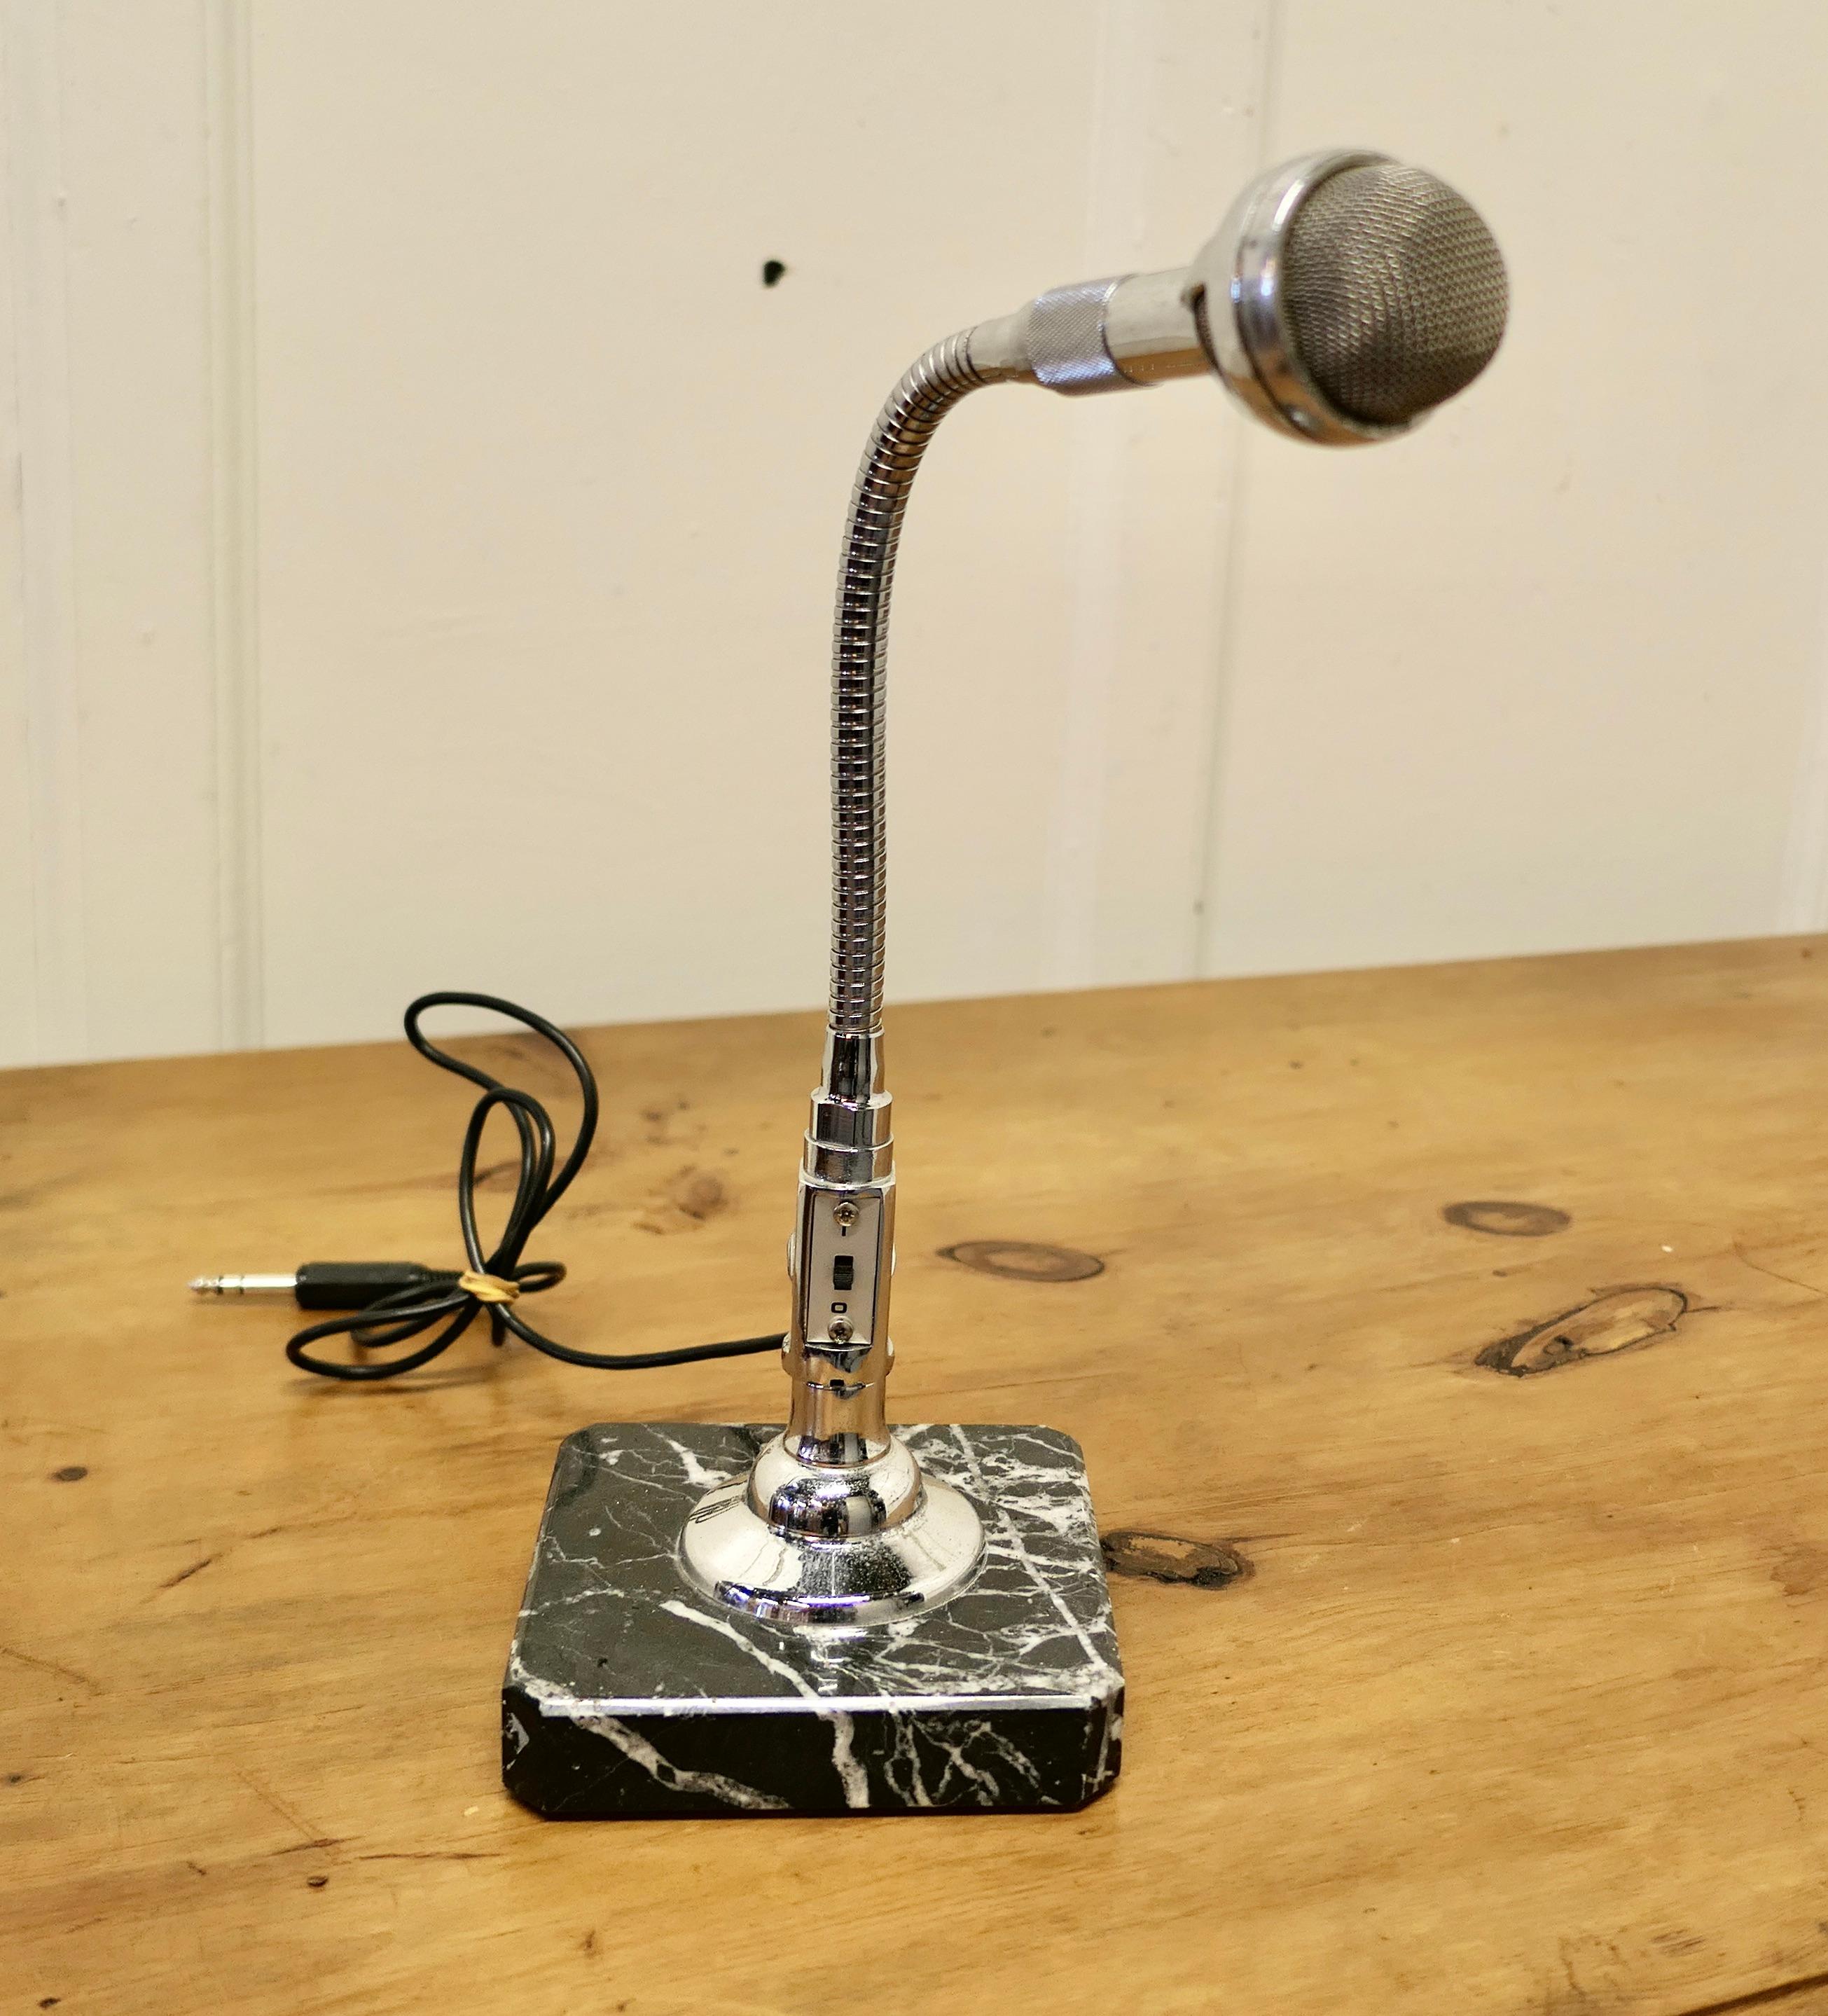 Classic Retro Chrome Mike by Bouyer set on a marble table stand

A Classic of its time, this Bouyer 709 Goose Neck Microphone would be great in a 60s Retro design setting, it is in excellent looking condition it appears to be working but it is